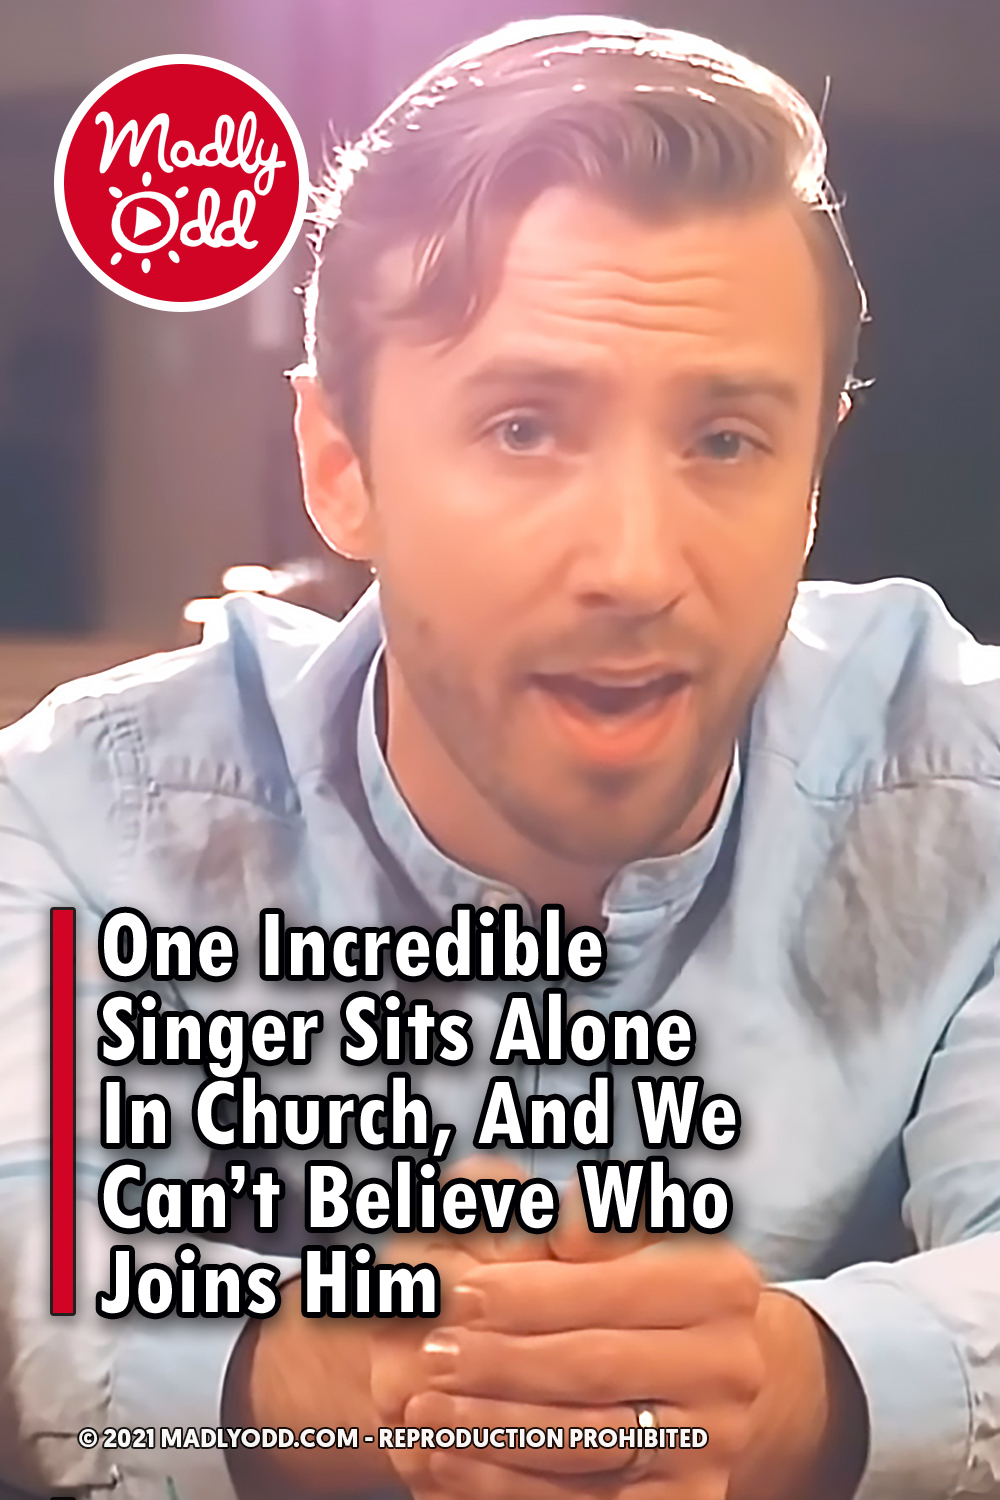 One Incredible Singer Sits Alone In Church, And We Can’t Believe Who Joins Him